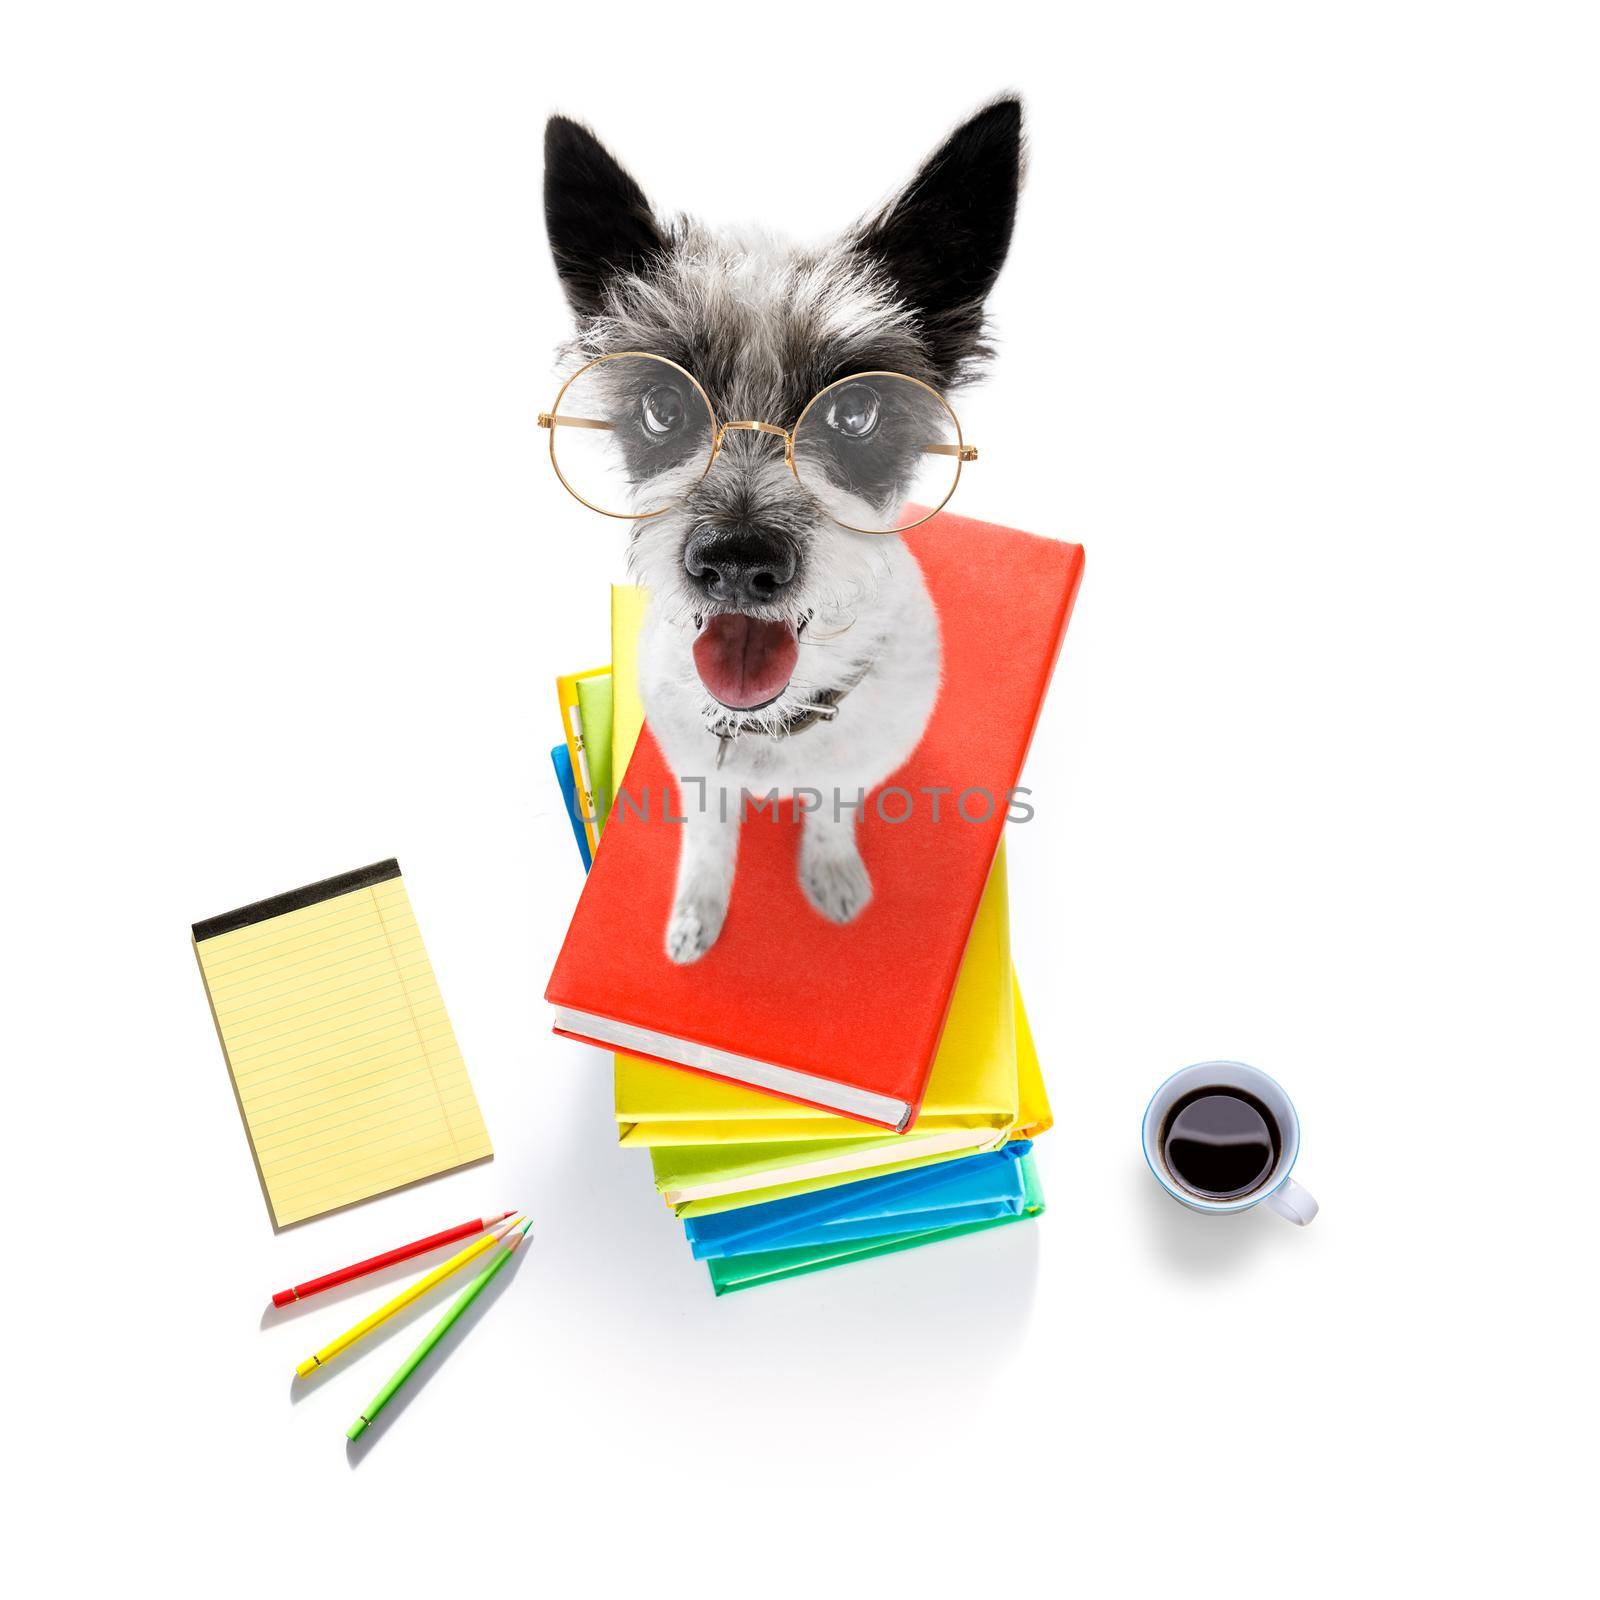 smart dog and books by Brosch